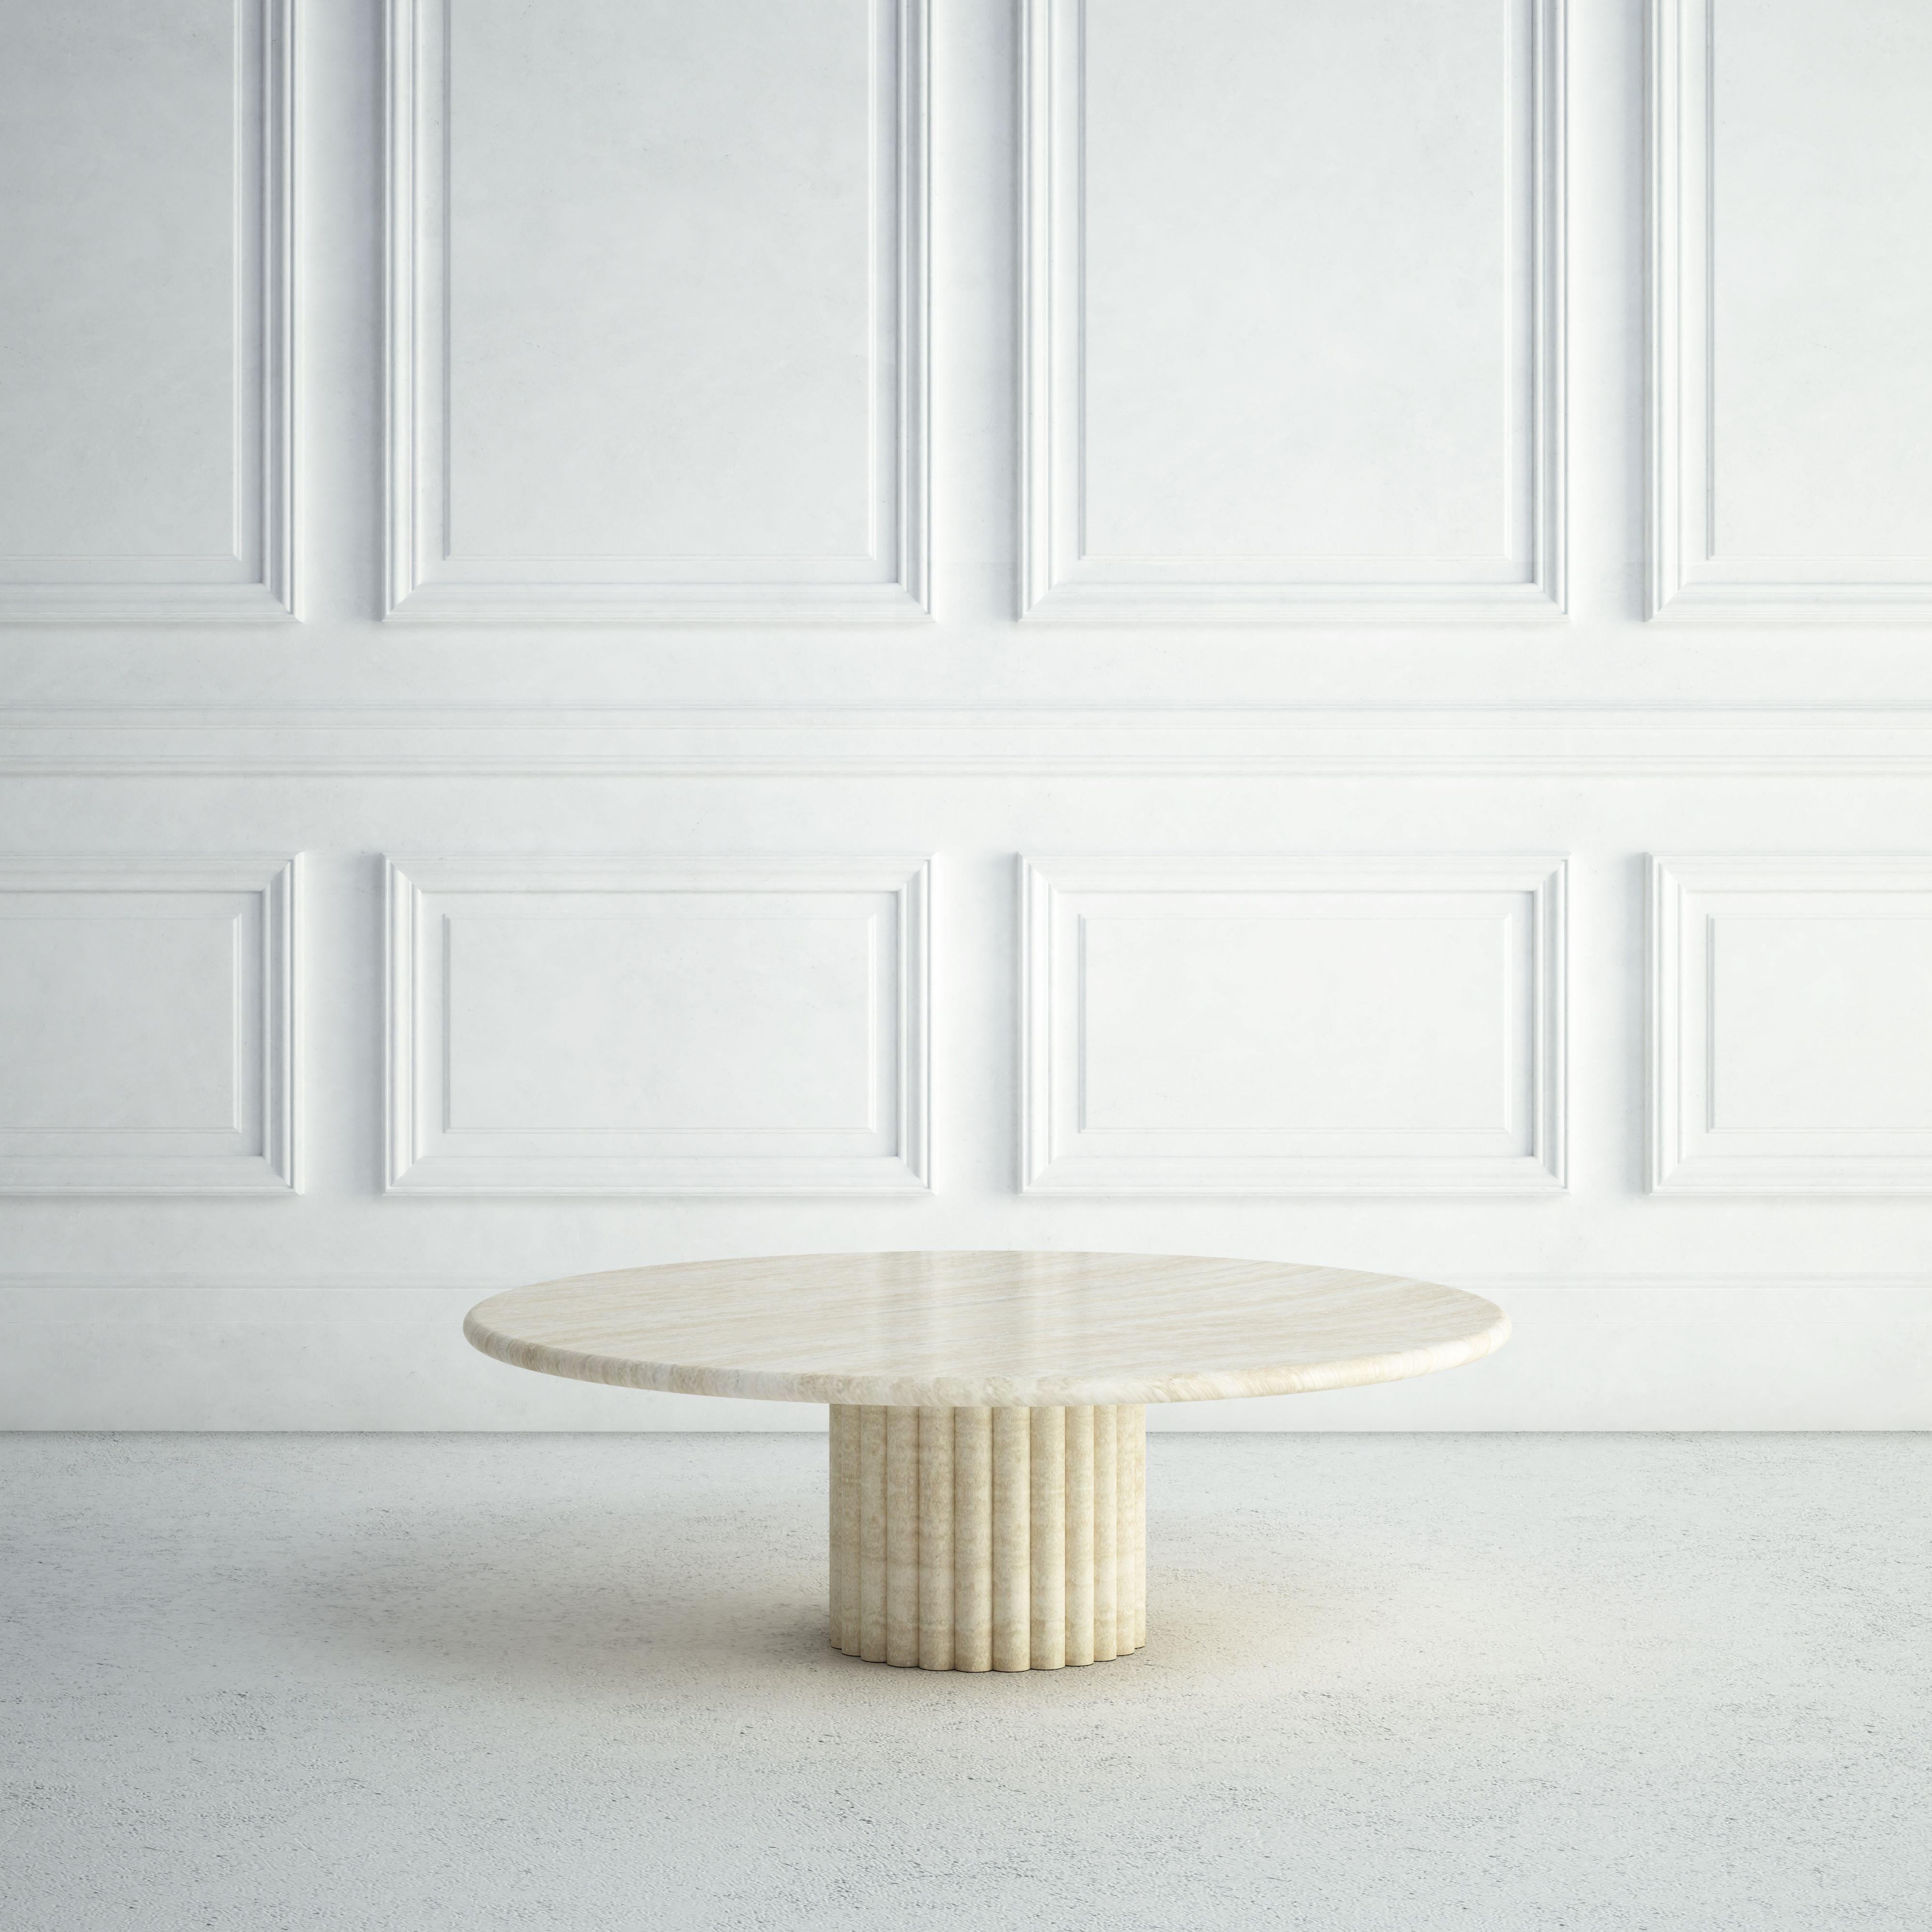 The Lucie is a modern stone coffee table, with a generous round top, and a bullnose edge detail.  The short rounded base is artfully made from several bullnose vertical sections.  All of these elements give it a distinctively stylish but softer